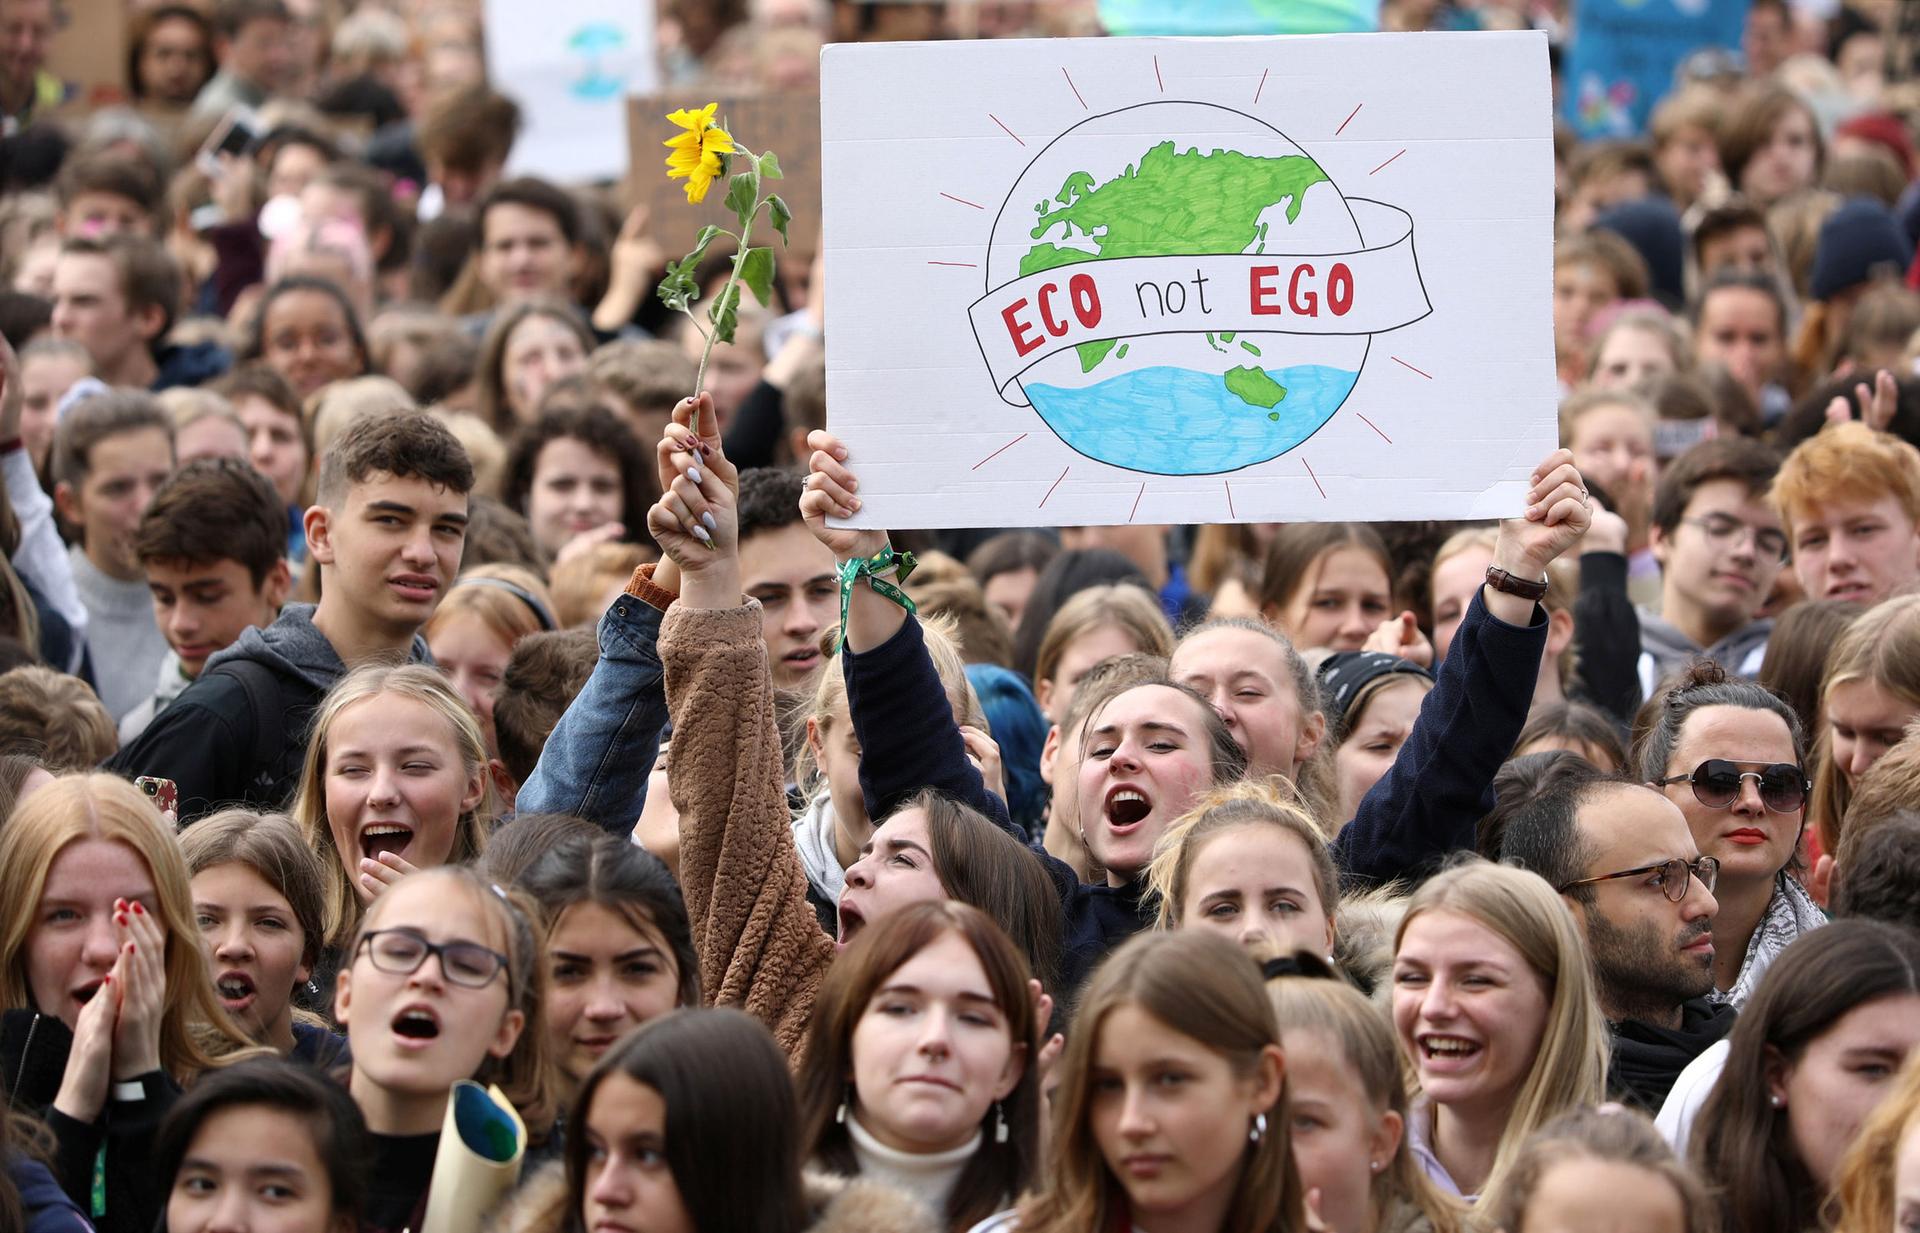 A large crowd of people are shown with one woman hollding a sign that reads, "Eco not Ego."